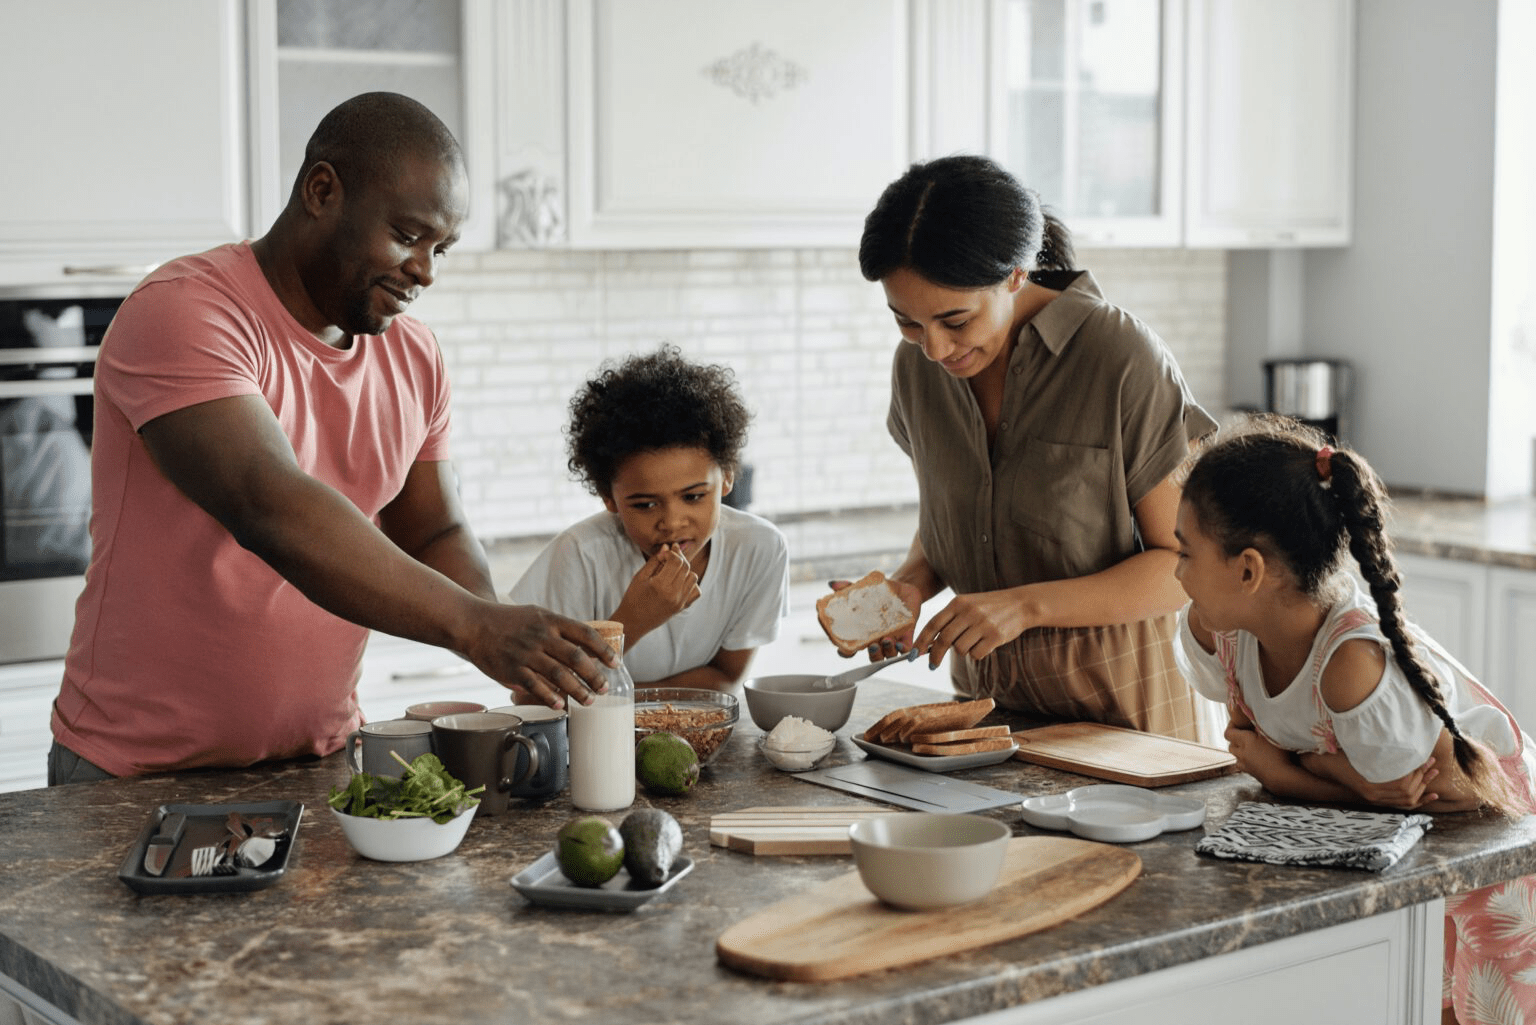 Cooking as a family can provide significant, sustained benefits for your children. Source: Tricia Contreras